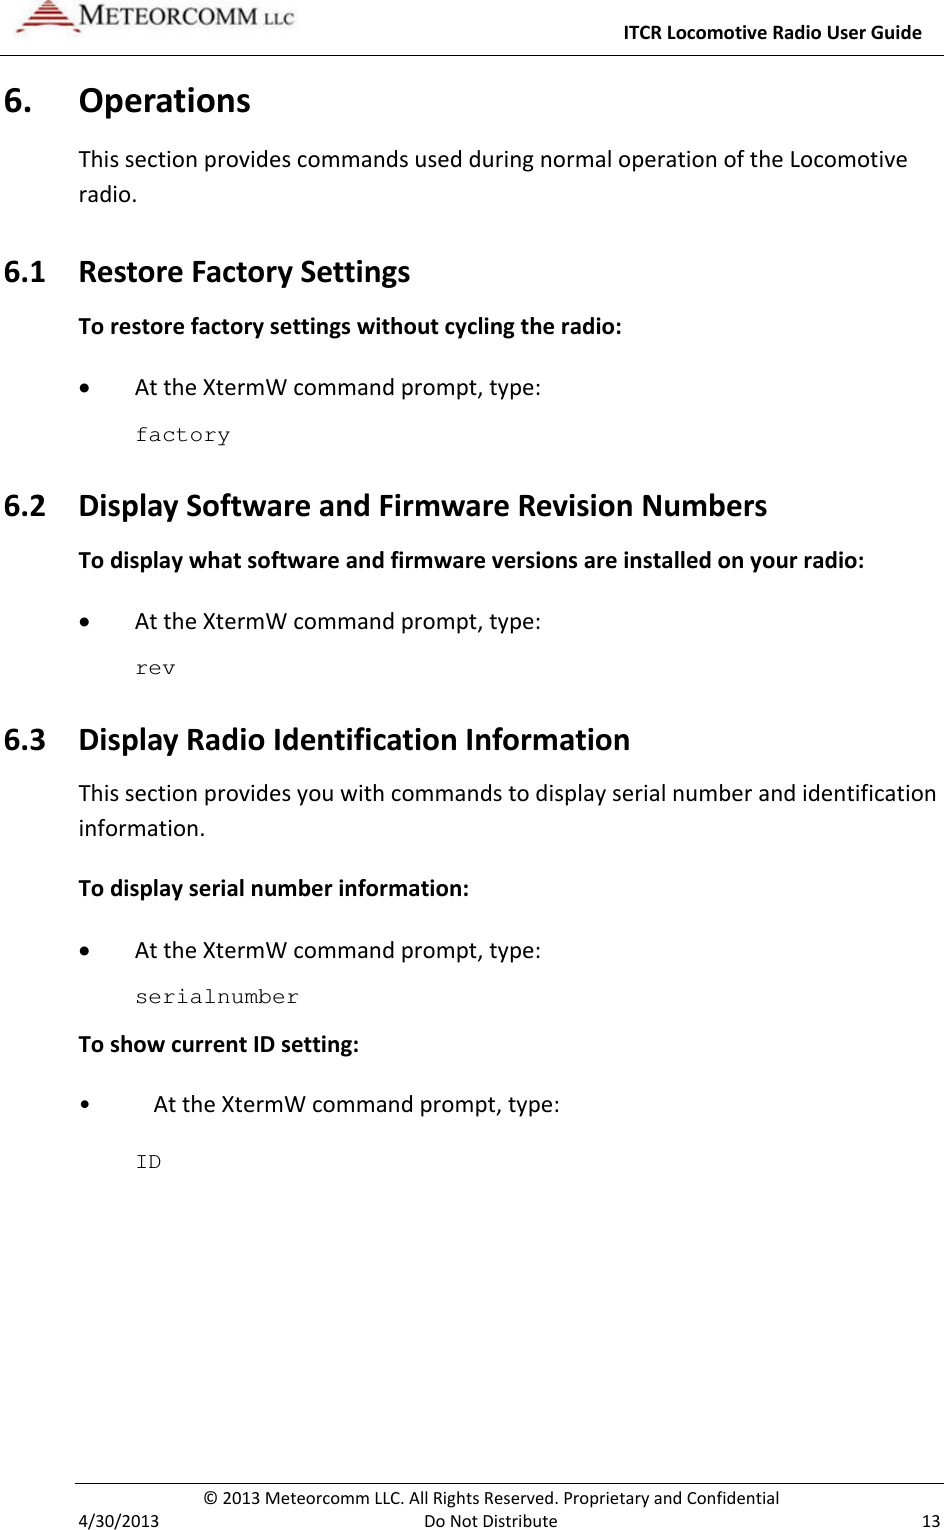     ITCR Locomotive Radio User Guide  © 2013 Meteorcomm LLC. All Rights Reserved. Proprietary and Confidential   4/30/2013  Do Not Distribute  13 6. Operations This section provides commands used during normal operation of the Locomotive radio.  6.1 Restore Factory Settings To restore factory settings without cycling the radio: • At the XtermW command prompt, type: factory 6.2 Display Software and Firmware Revision Numbers To display what software and firmware versions are installed on your radio: • At the XtermW command prompt, type: rev 6.3 Display Radio Identification Information This section provides you with commands to display serial number and identification information. To display serial number information: • At the XtermW command prompt, type: serialnumber To show current ID setting: • At the XtermW command prompt, type: ID  